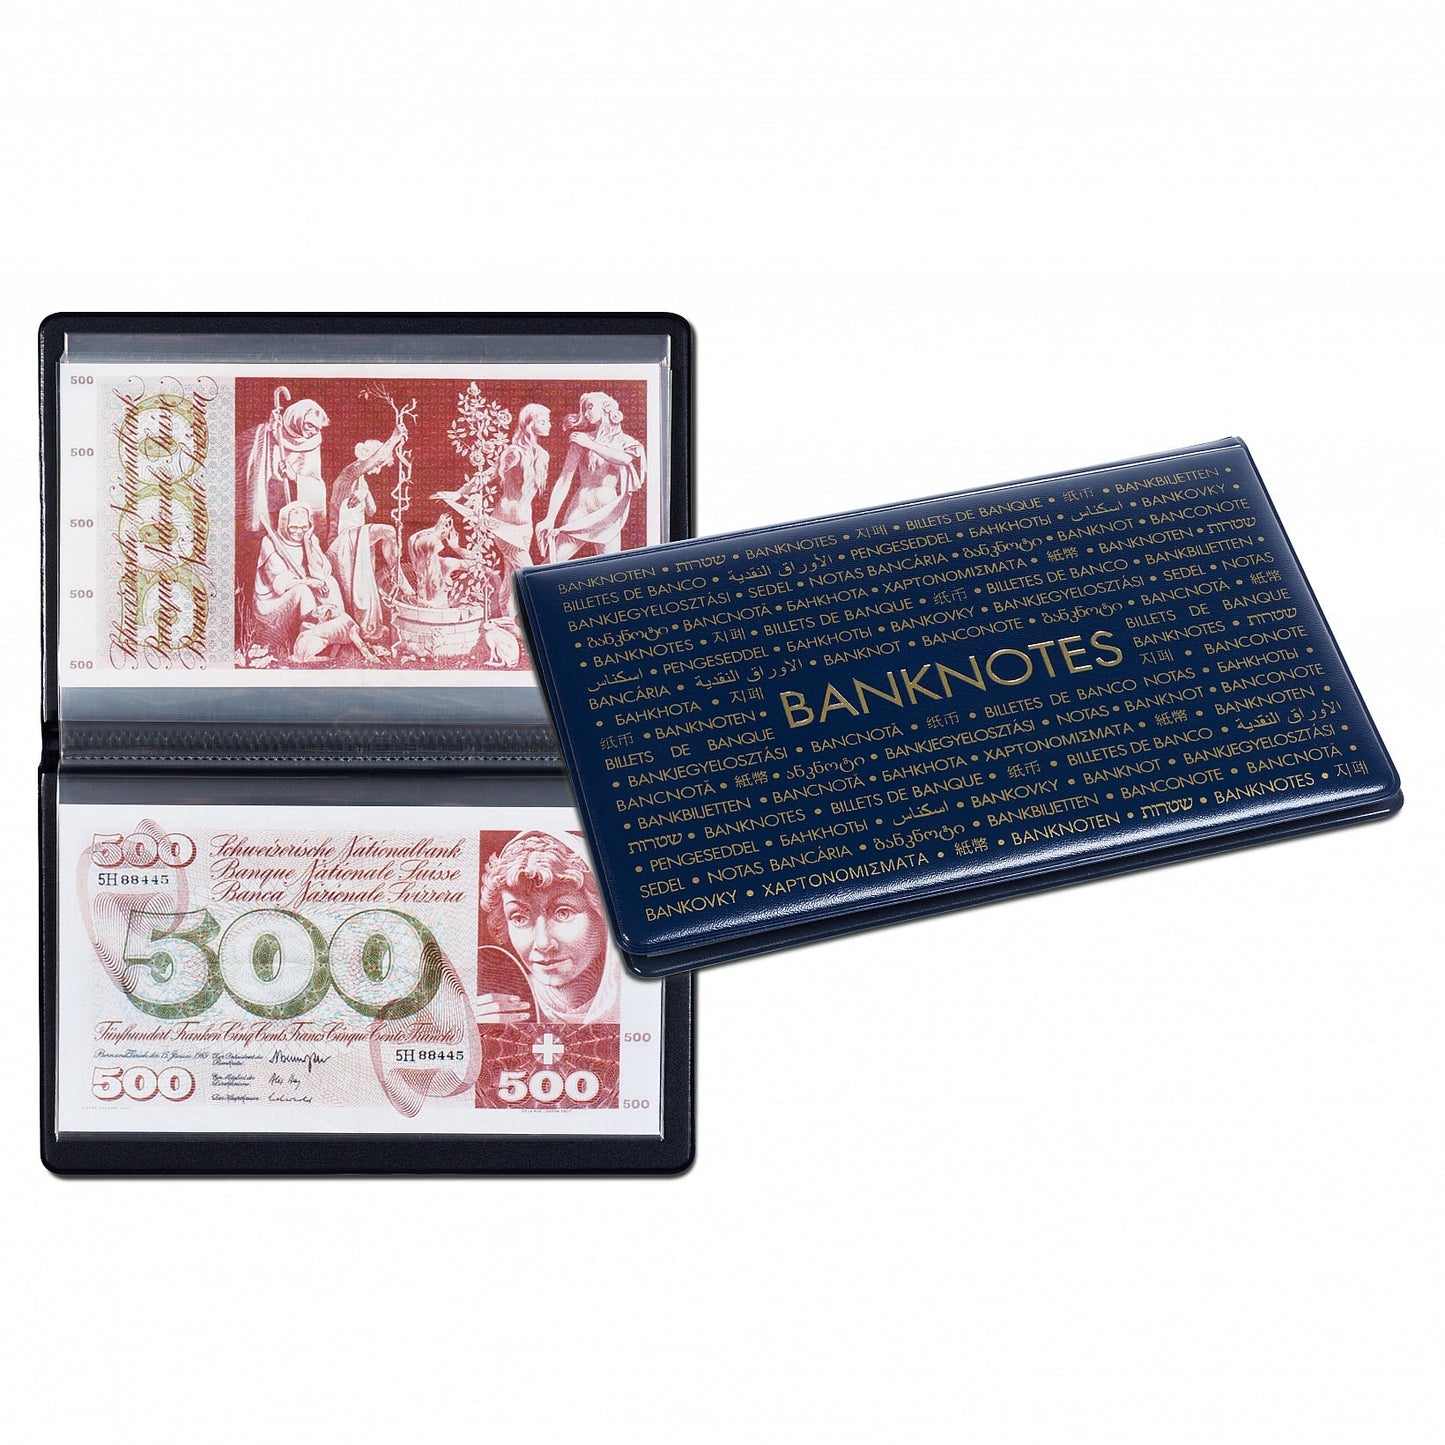 Route Banknotes 210